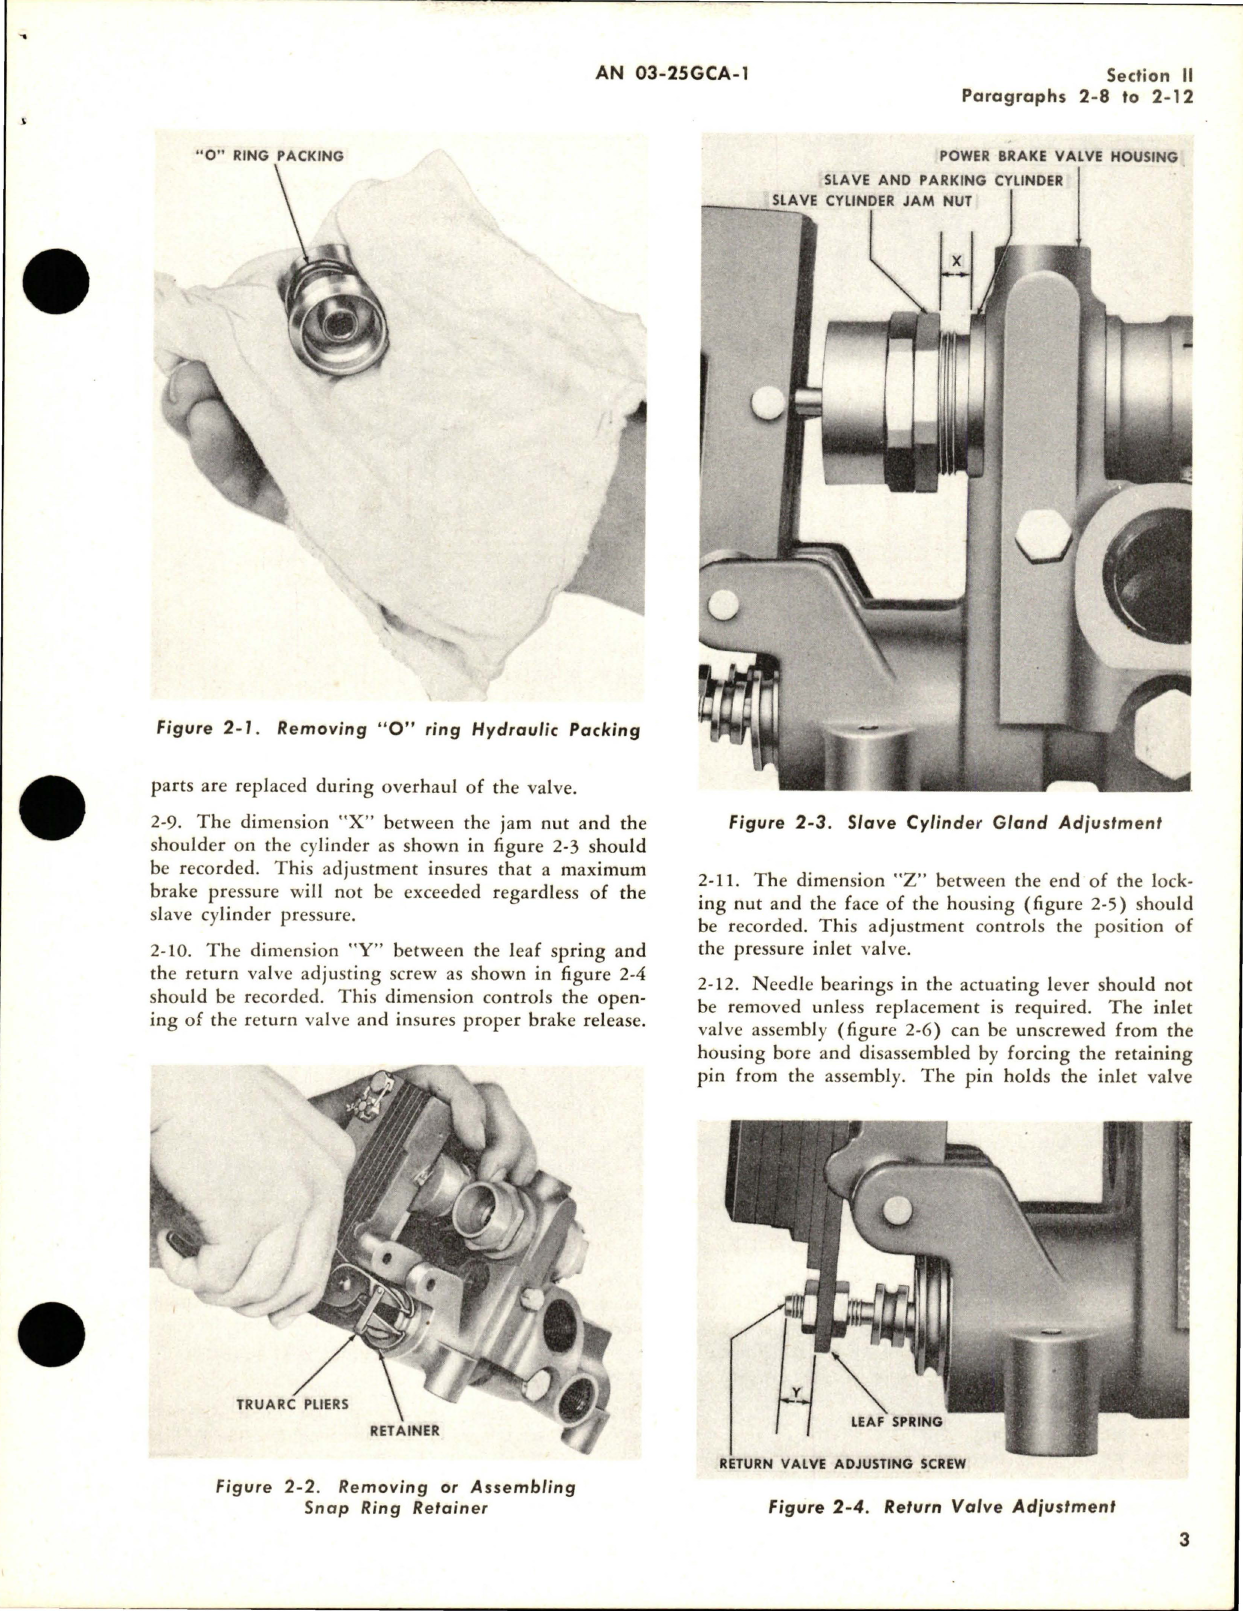 Sample page 7 from AirCorps Library document: Overhaul Instructions for Power Brake Valves - Hydraulic and Mechanical